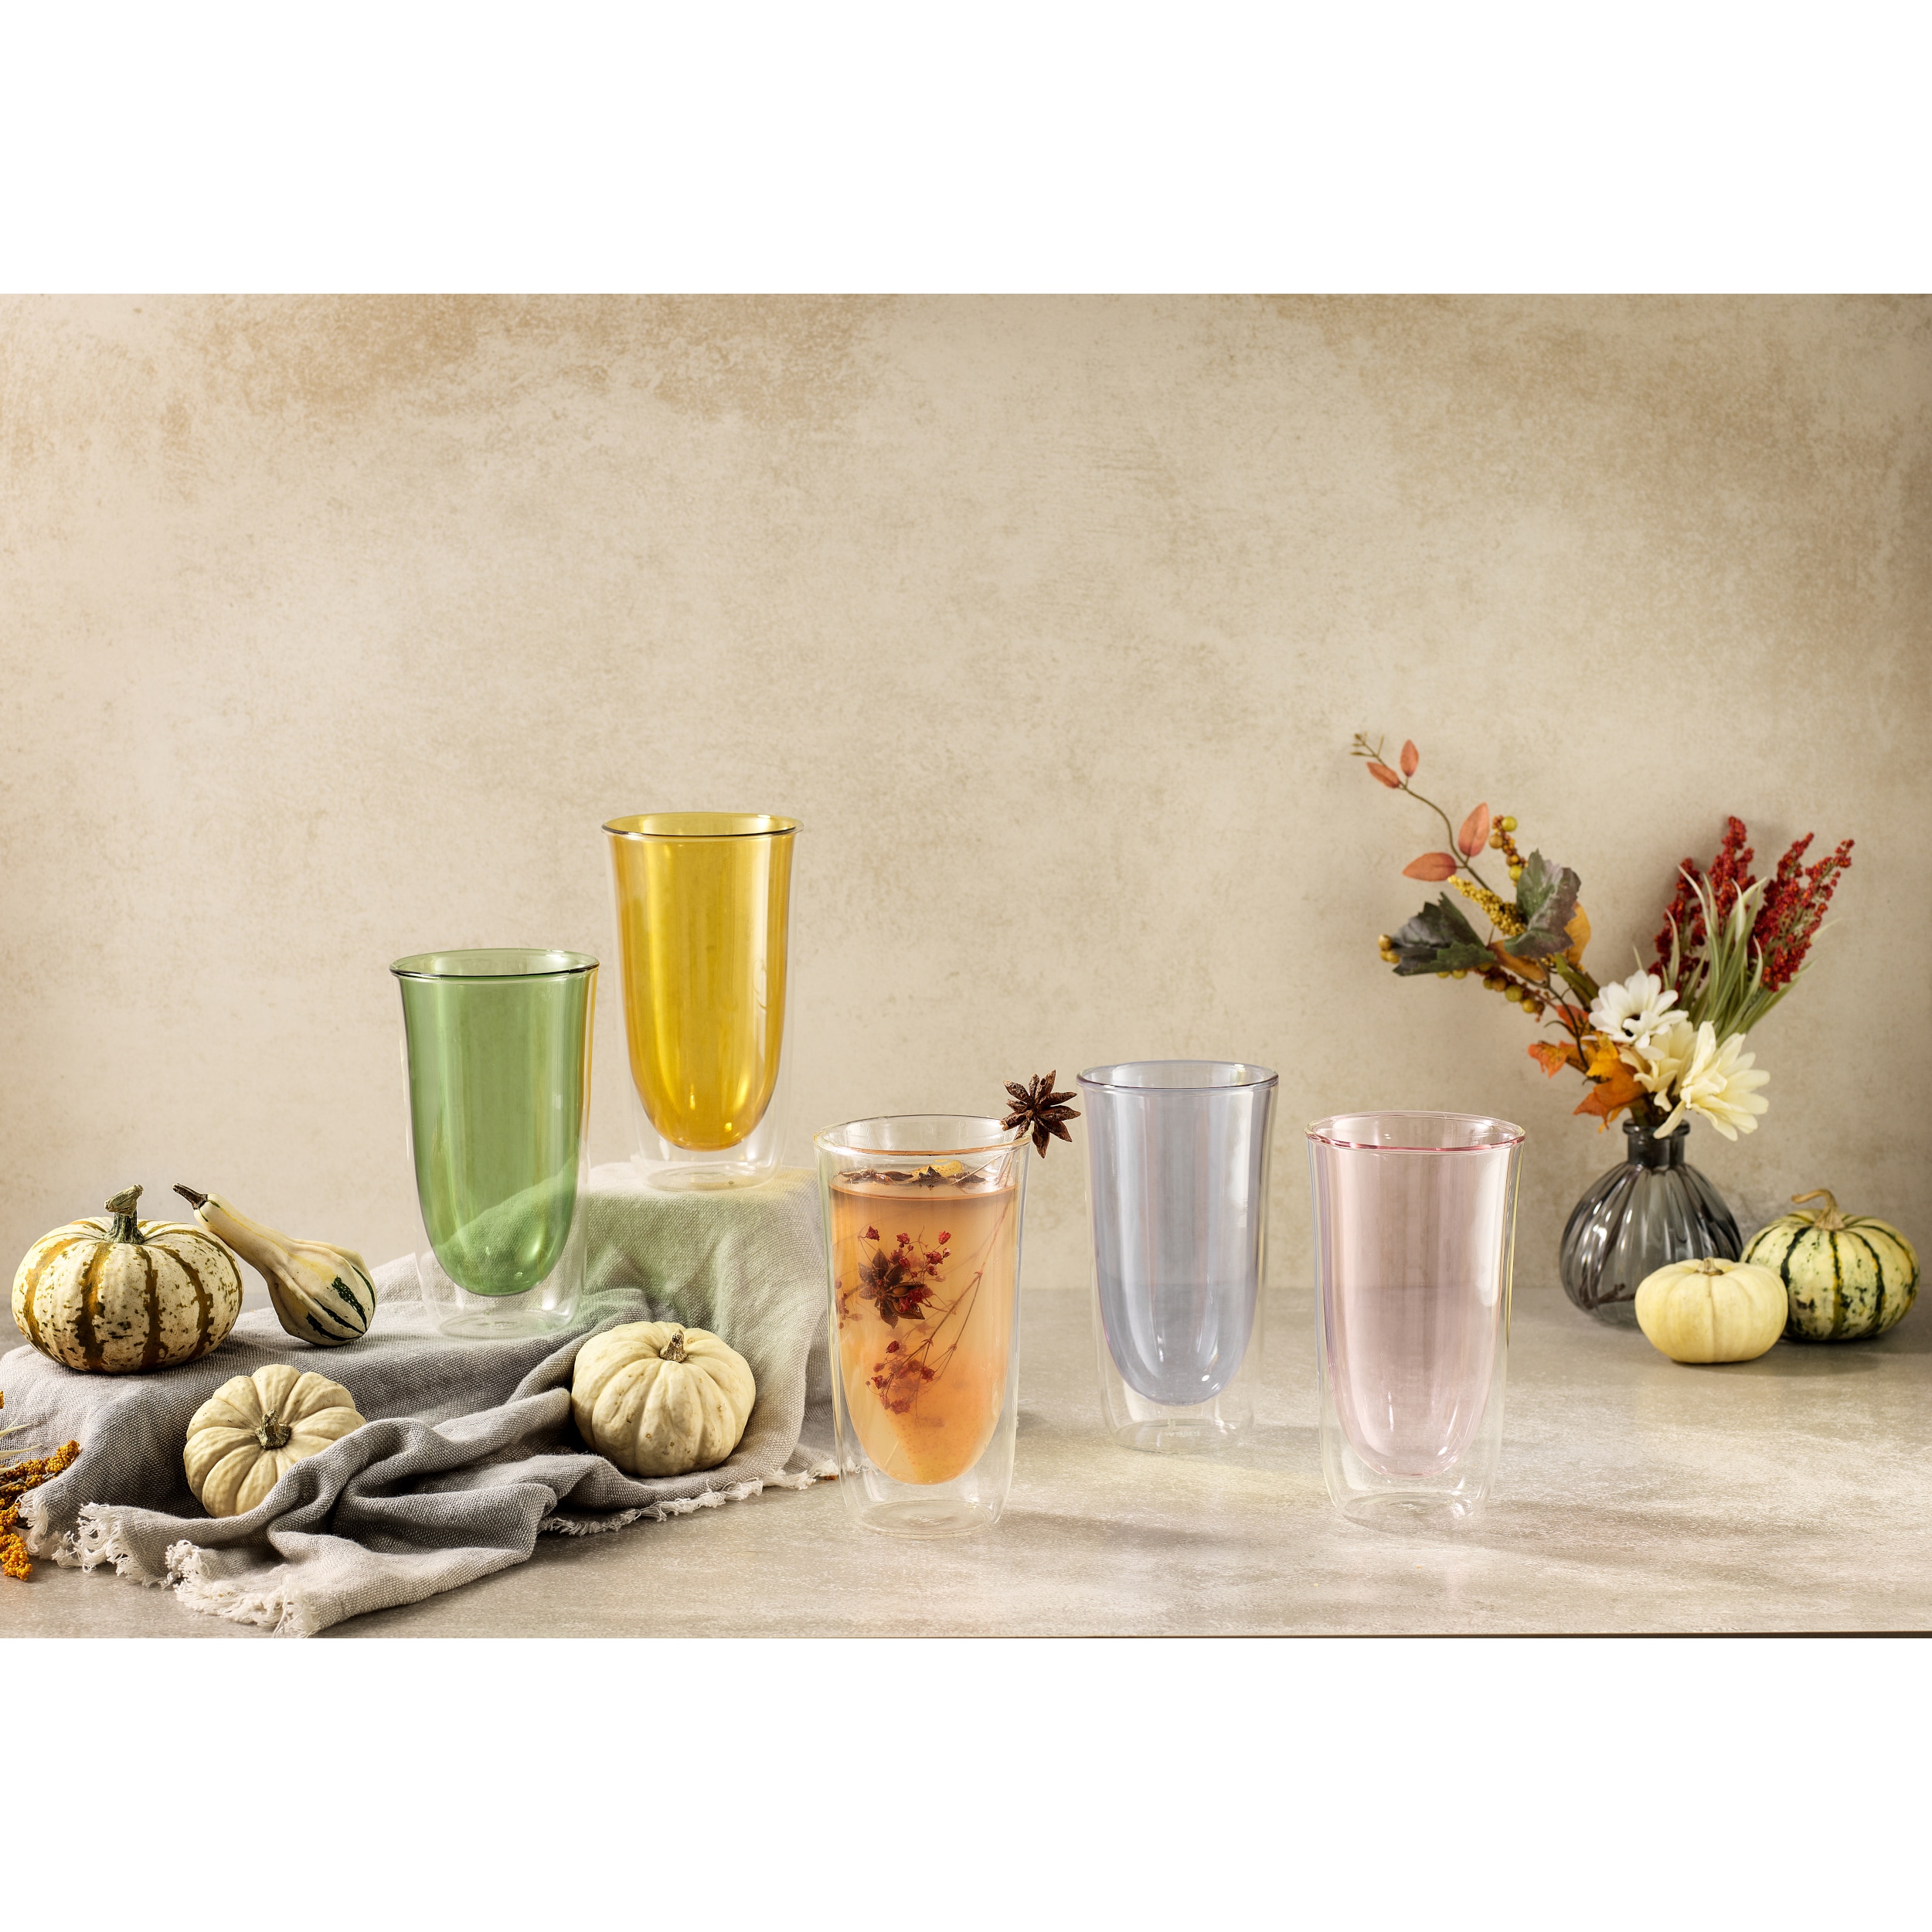 Levitea Double Wall Insulated Glasses - 8.4 oz- Set of 4 